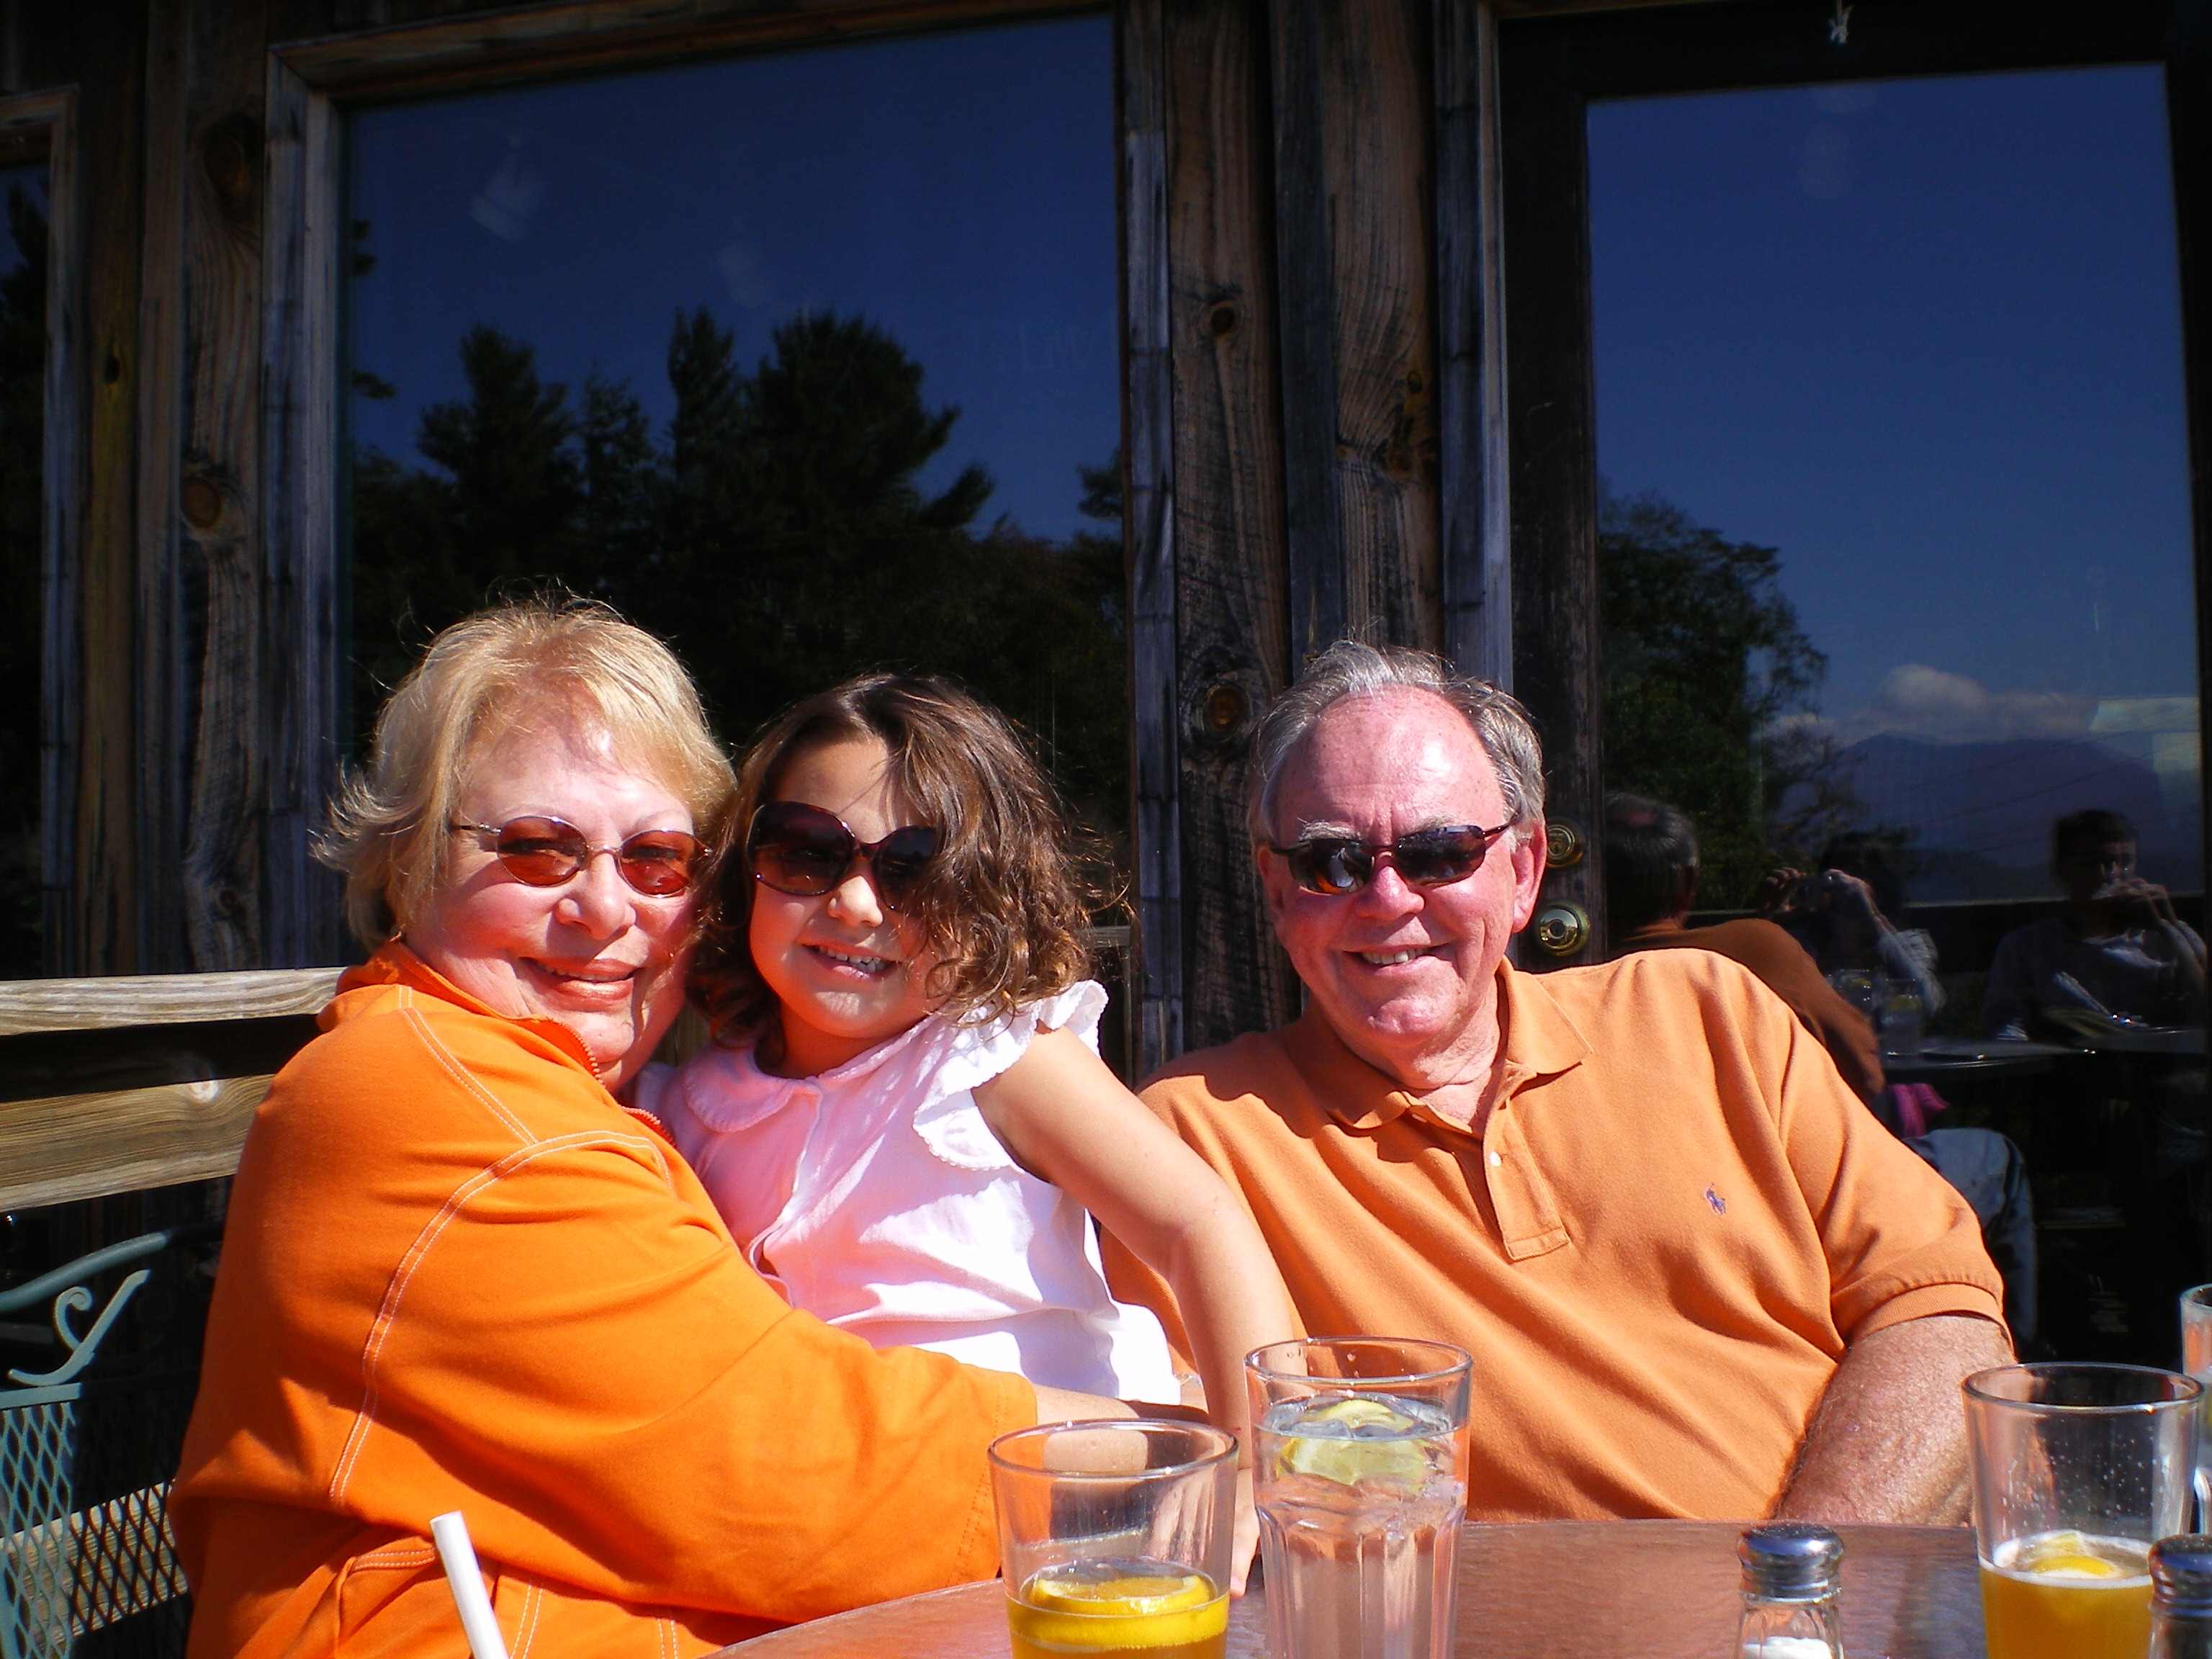 My Parents with My Niece Anne Shelton (And No They Aren't Tennessee Fans)